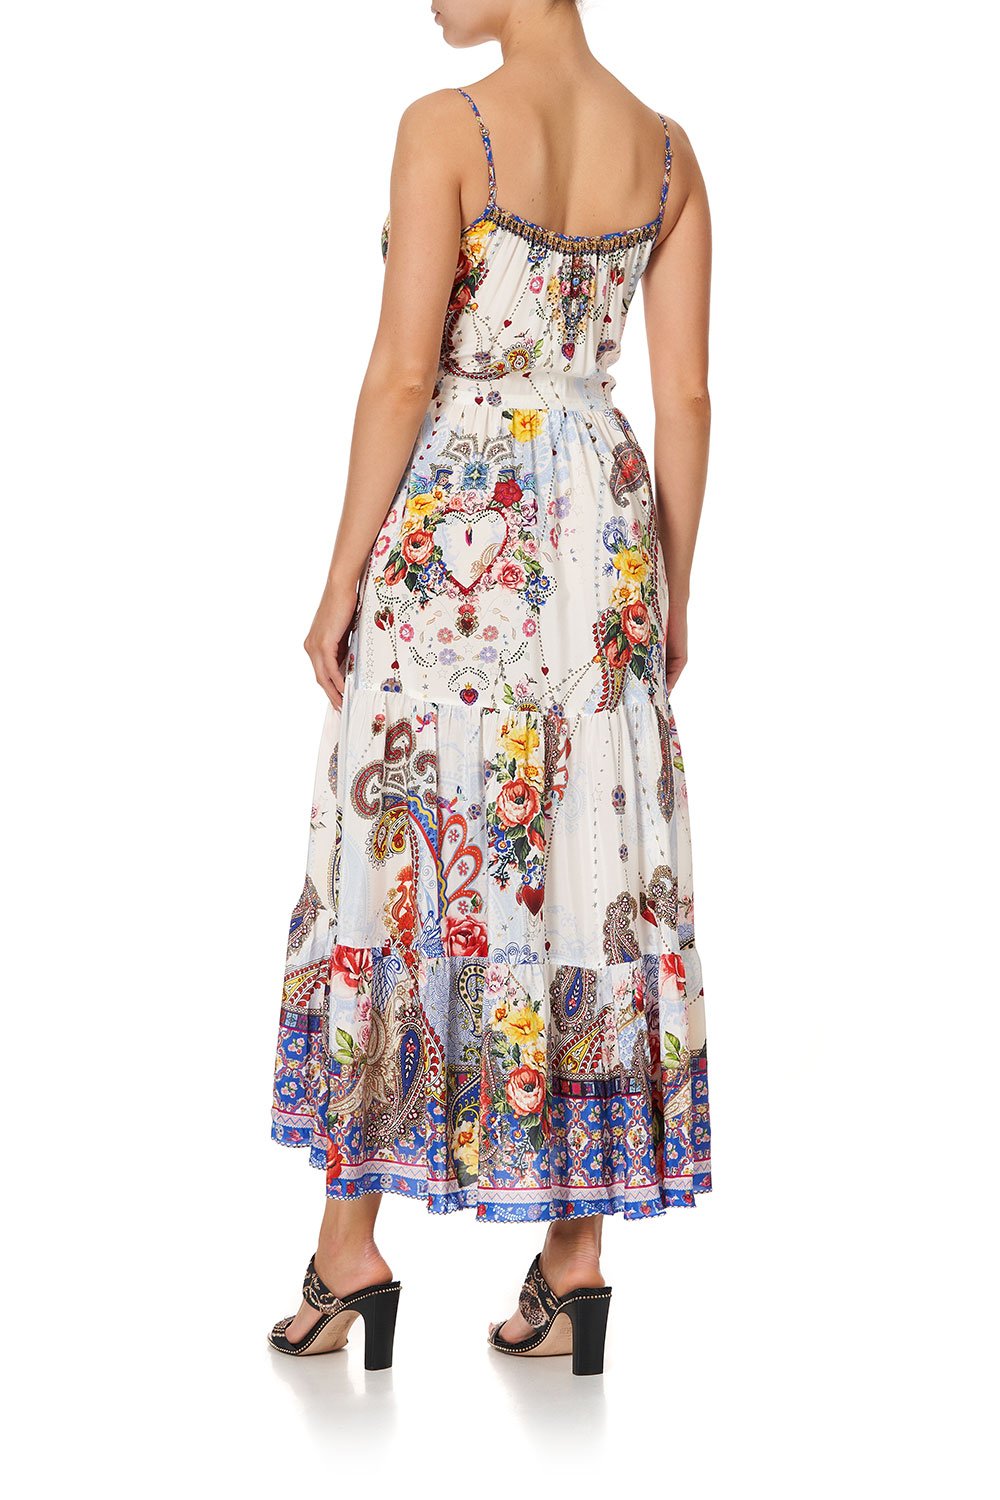 DRESS WITH FRONT TIE DETAIL FRIDA FREEDOM